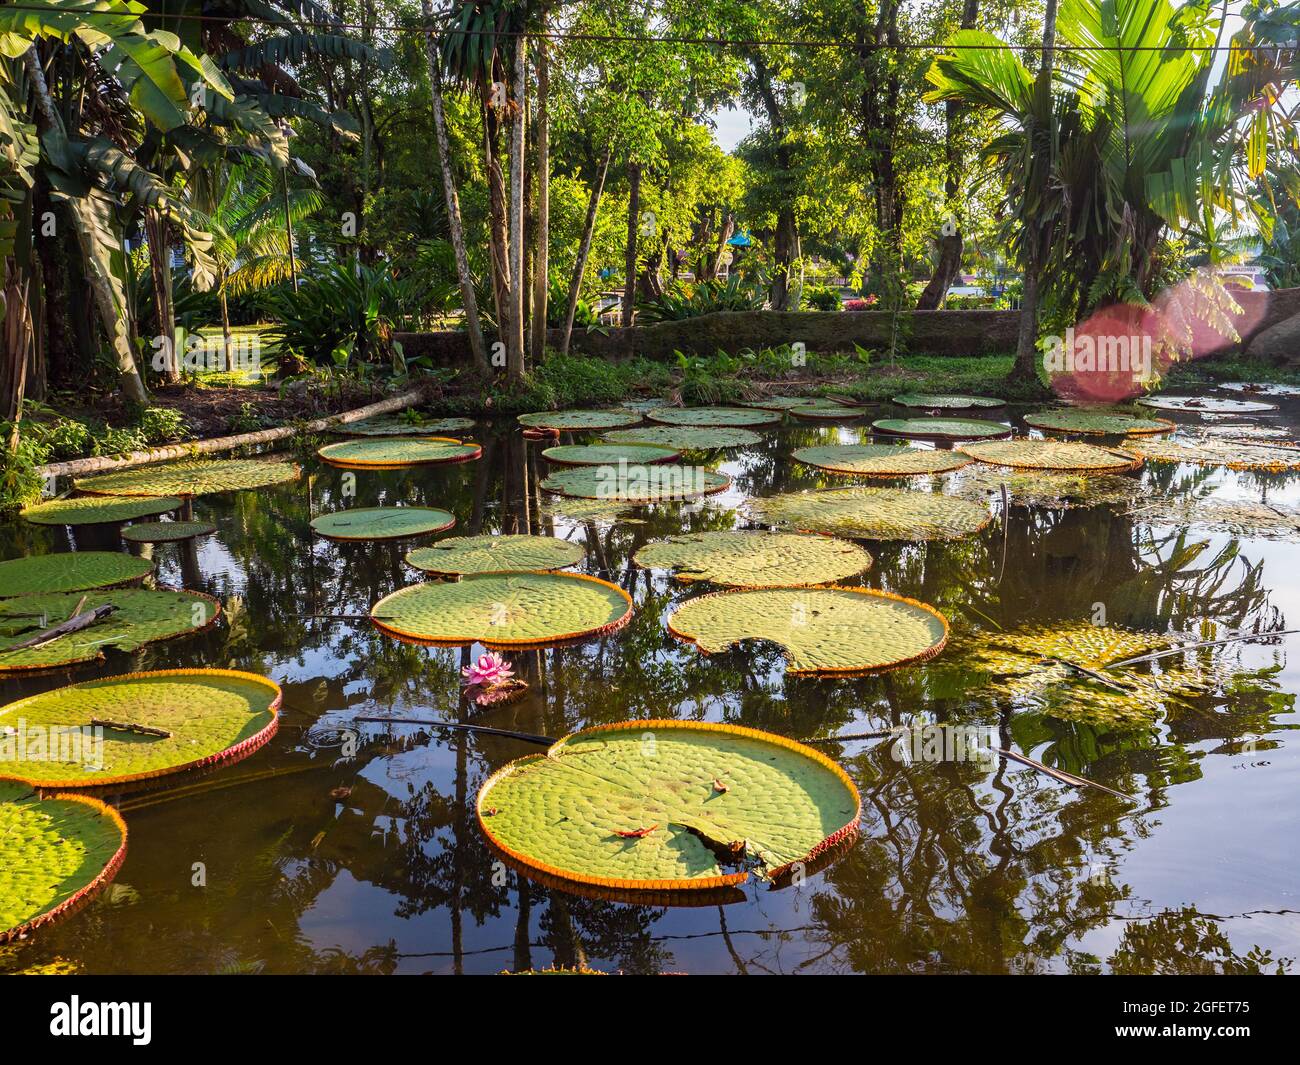 Victoria amazonica in the park of Leticia, Colombia. It is a species of flowering plant, the largest of the Nymphaeaceae family of water lilies. The l Stock Photo